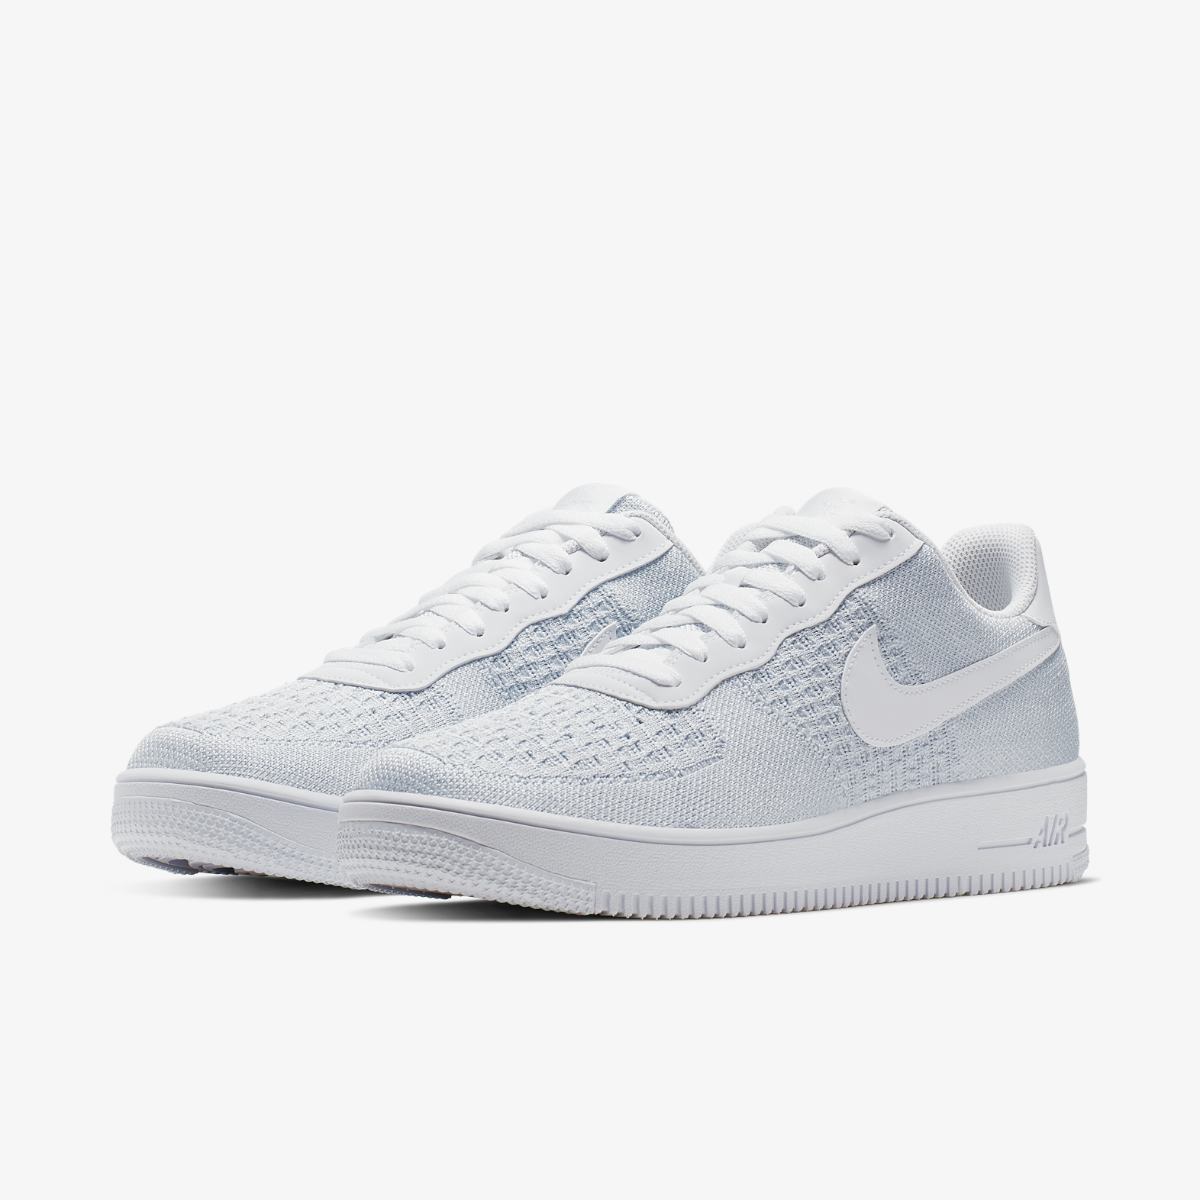 NIKE AIR FORCE 1 FLYKNIT 2.0